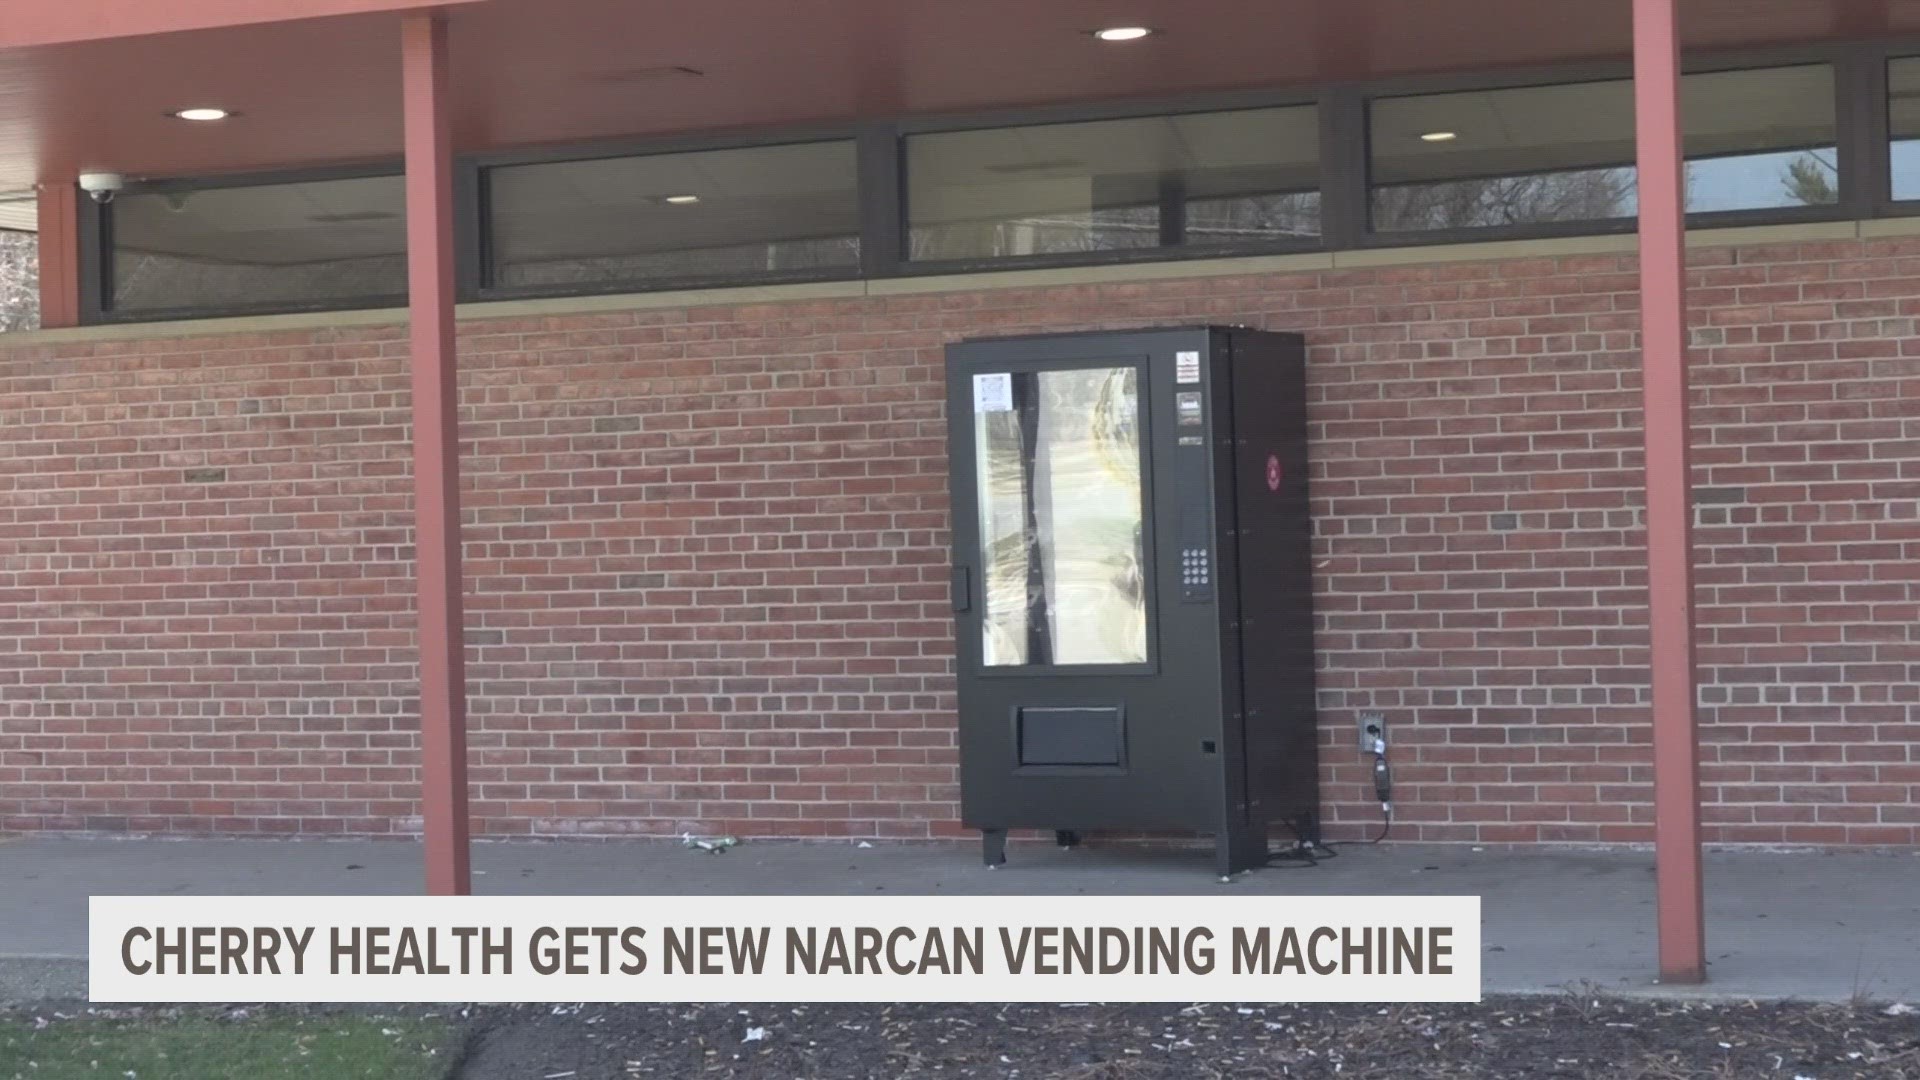 A West Michigan organization is hoping to help with opioid overdoses by providing more access to Narcan vending machines.